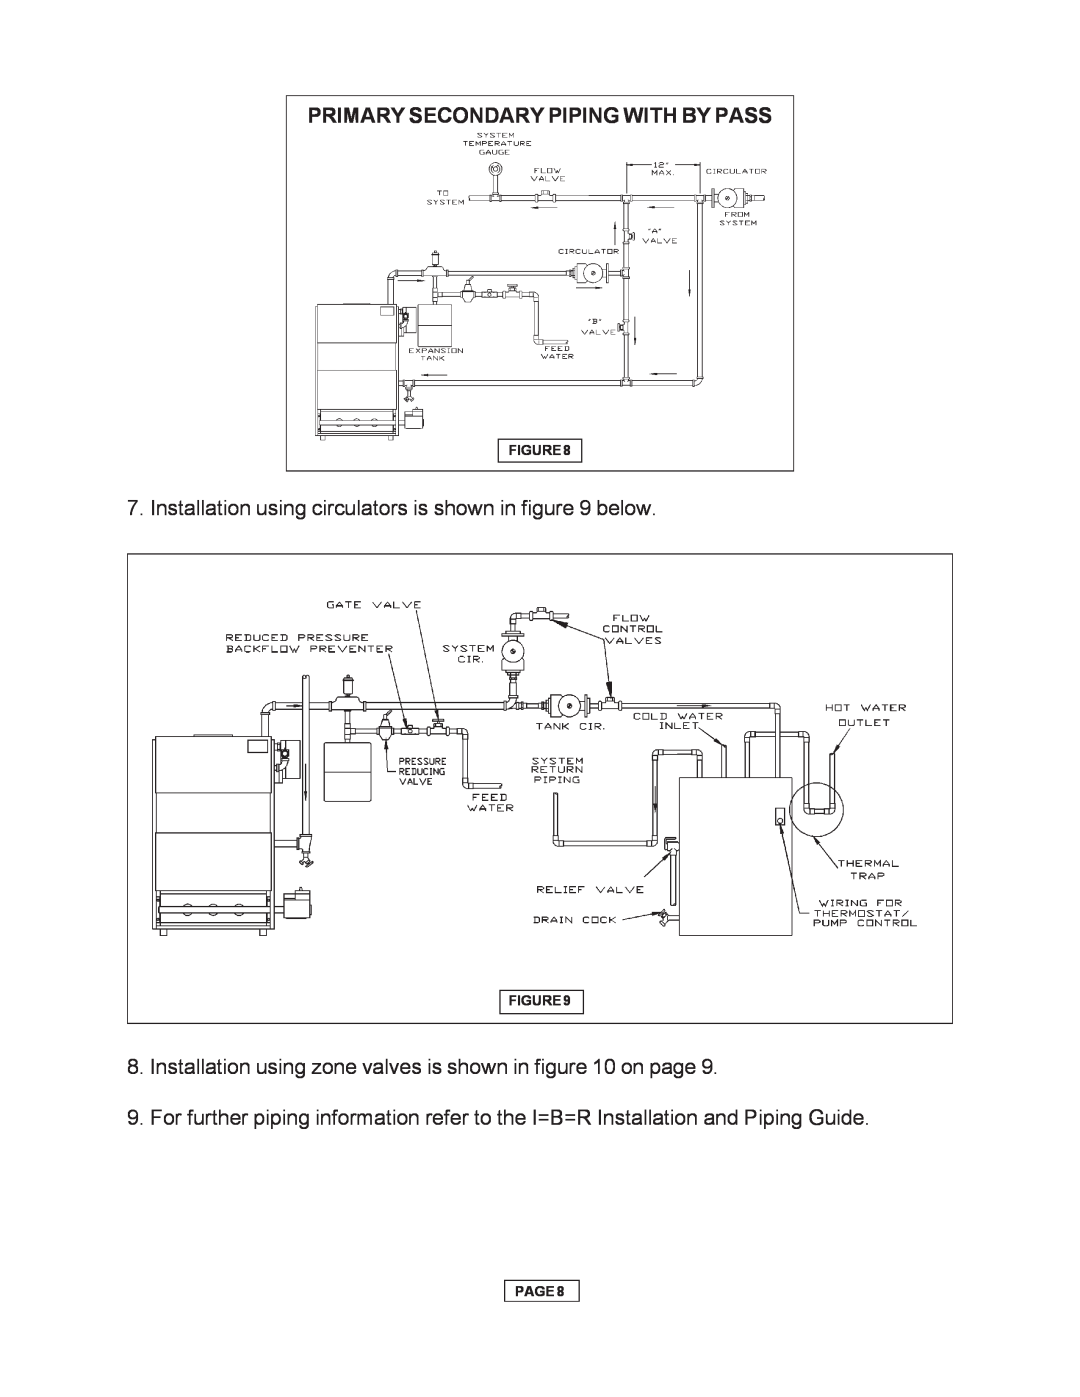 Utica Gas-fired Boiler manual Primary Secondary Piping With By Pass 